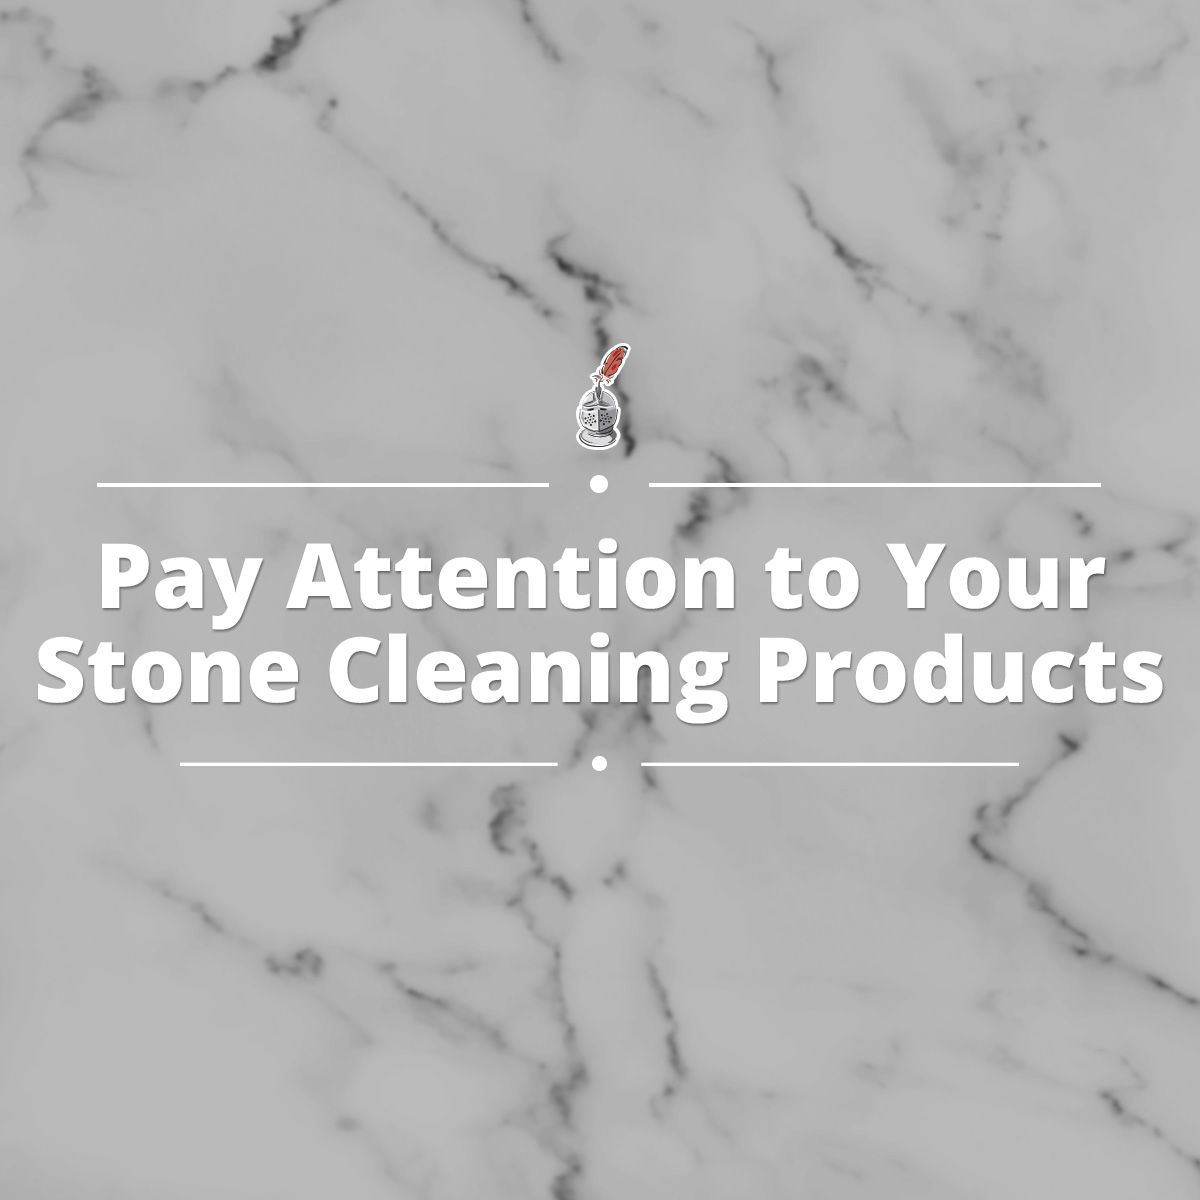 Pay Attention to Your Stone Cleaning Products